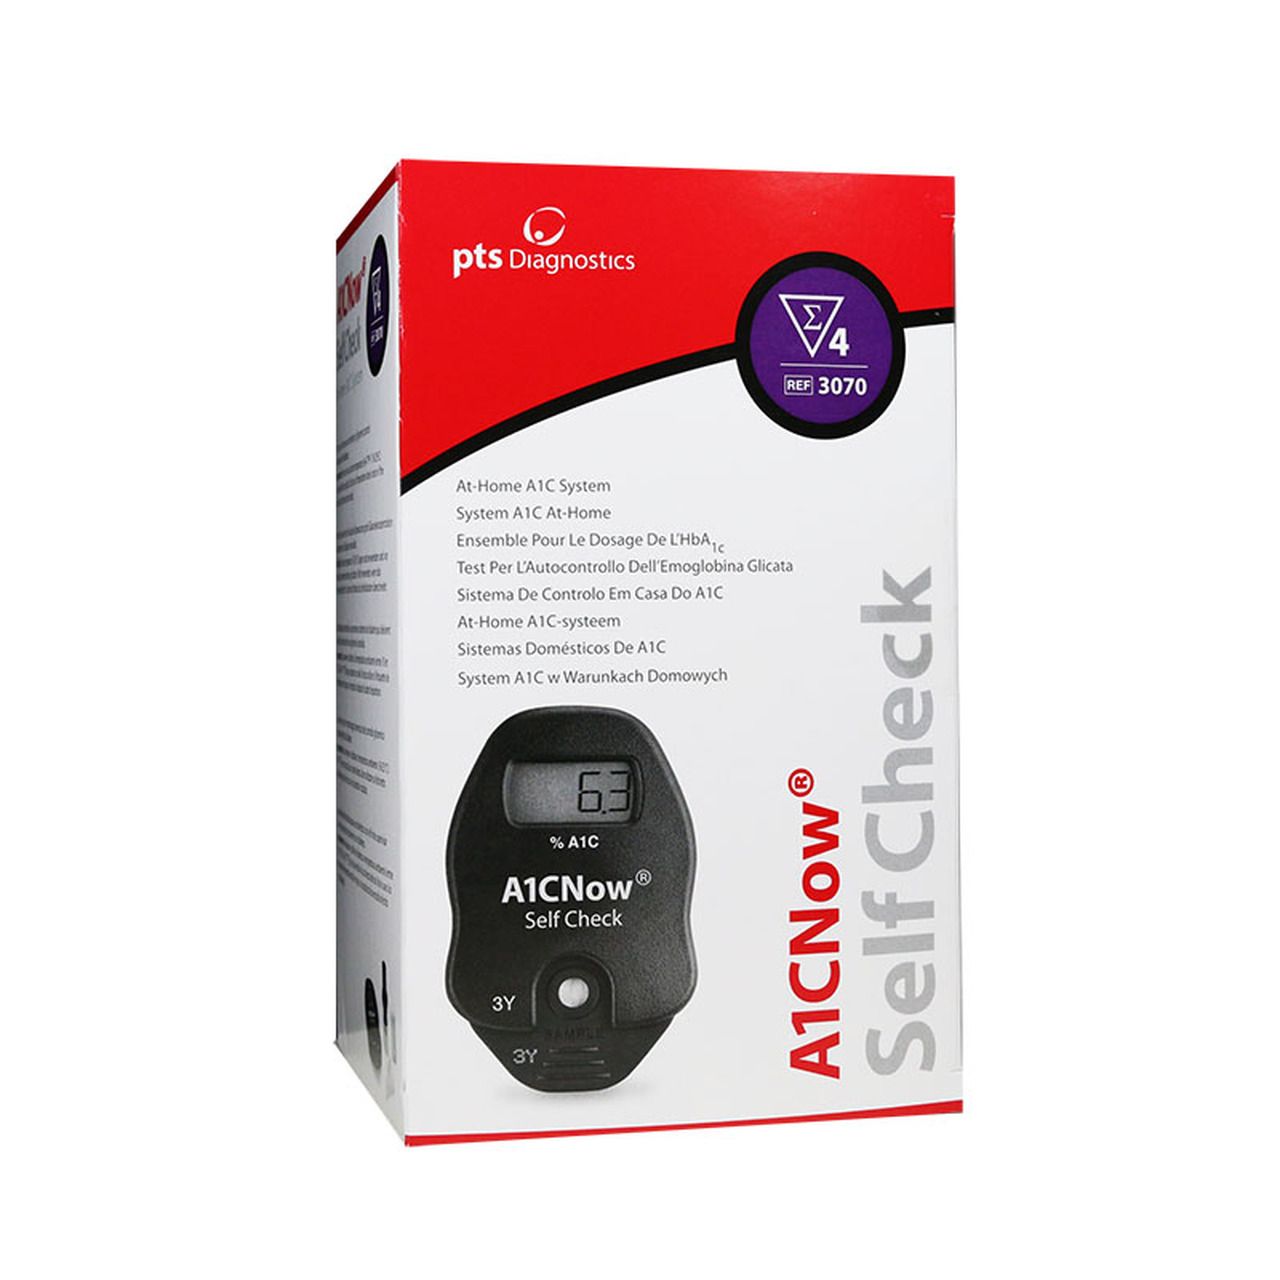 DISCA1CNow SelfCheck - Includes Analyzer and 4 Test Strips